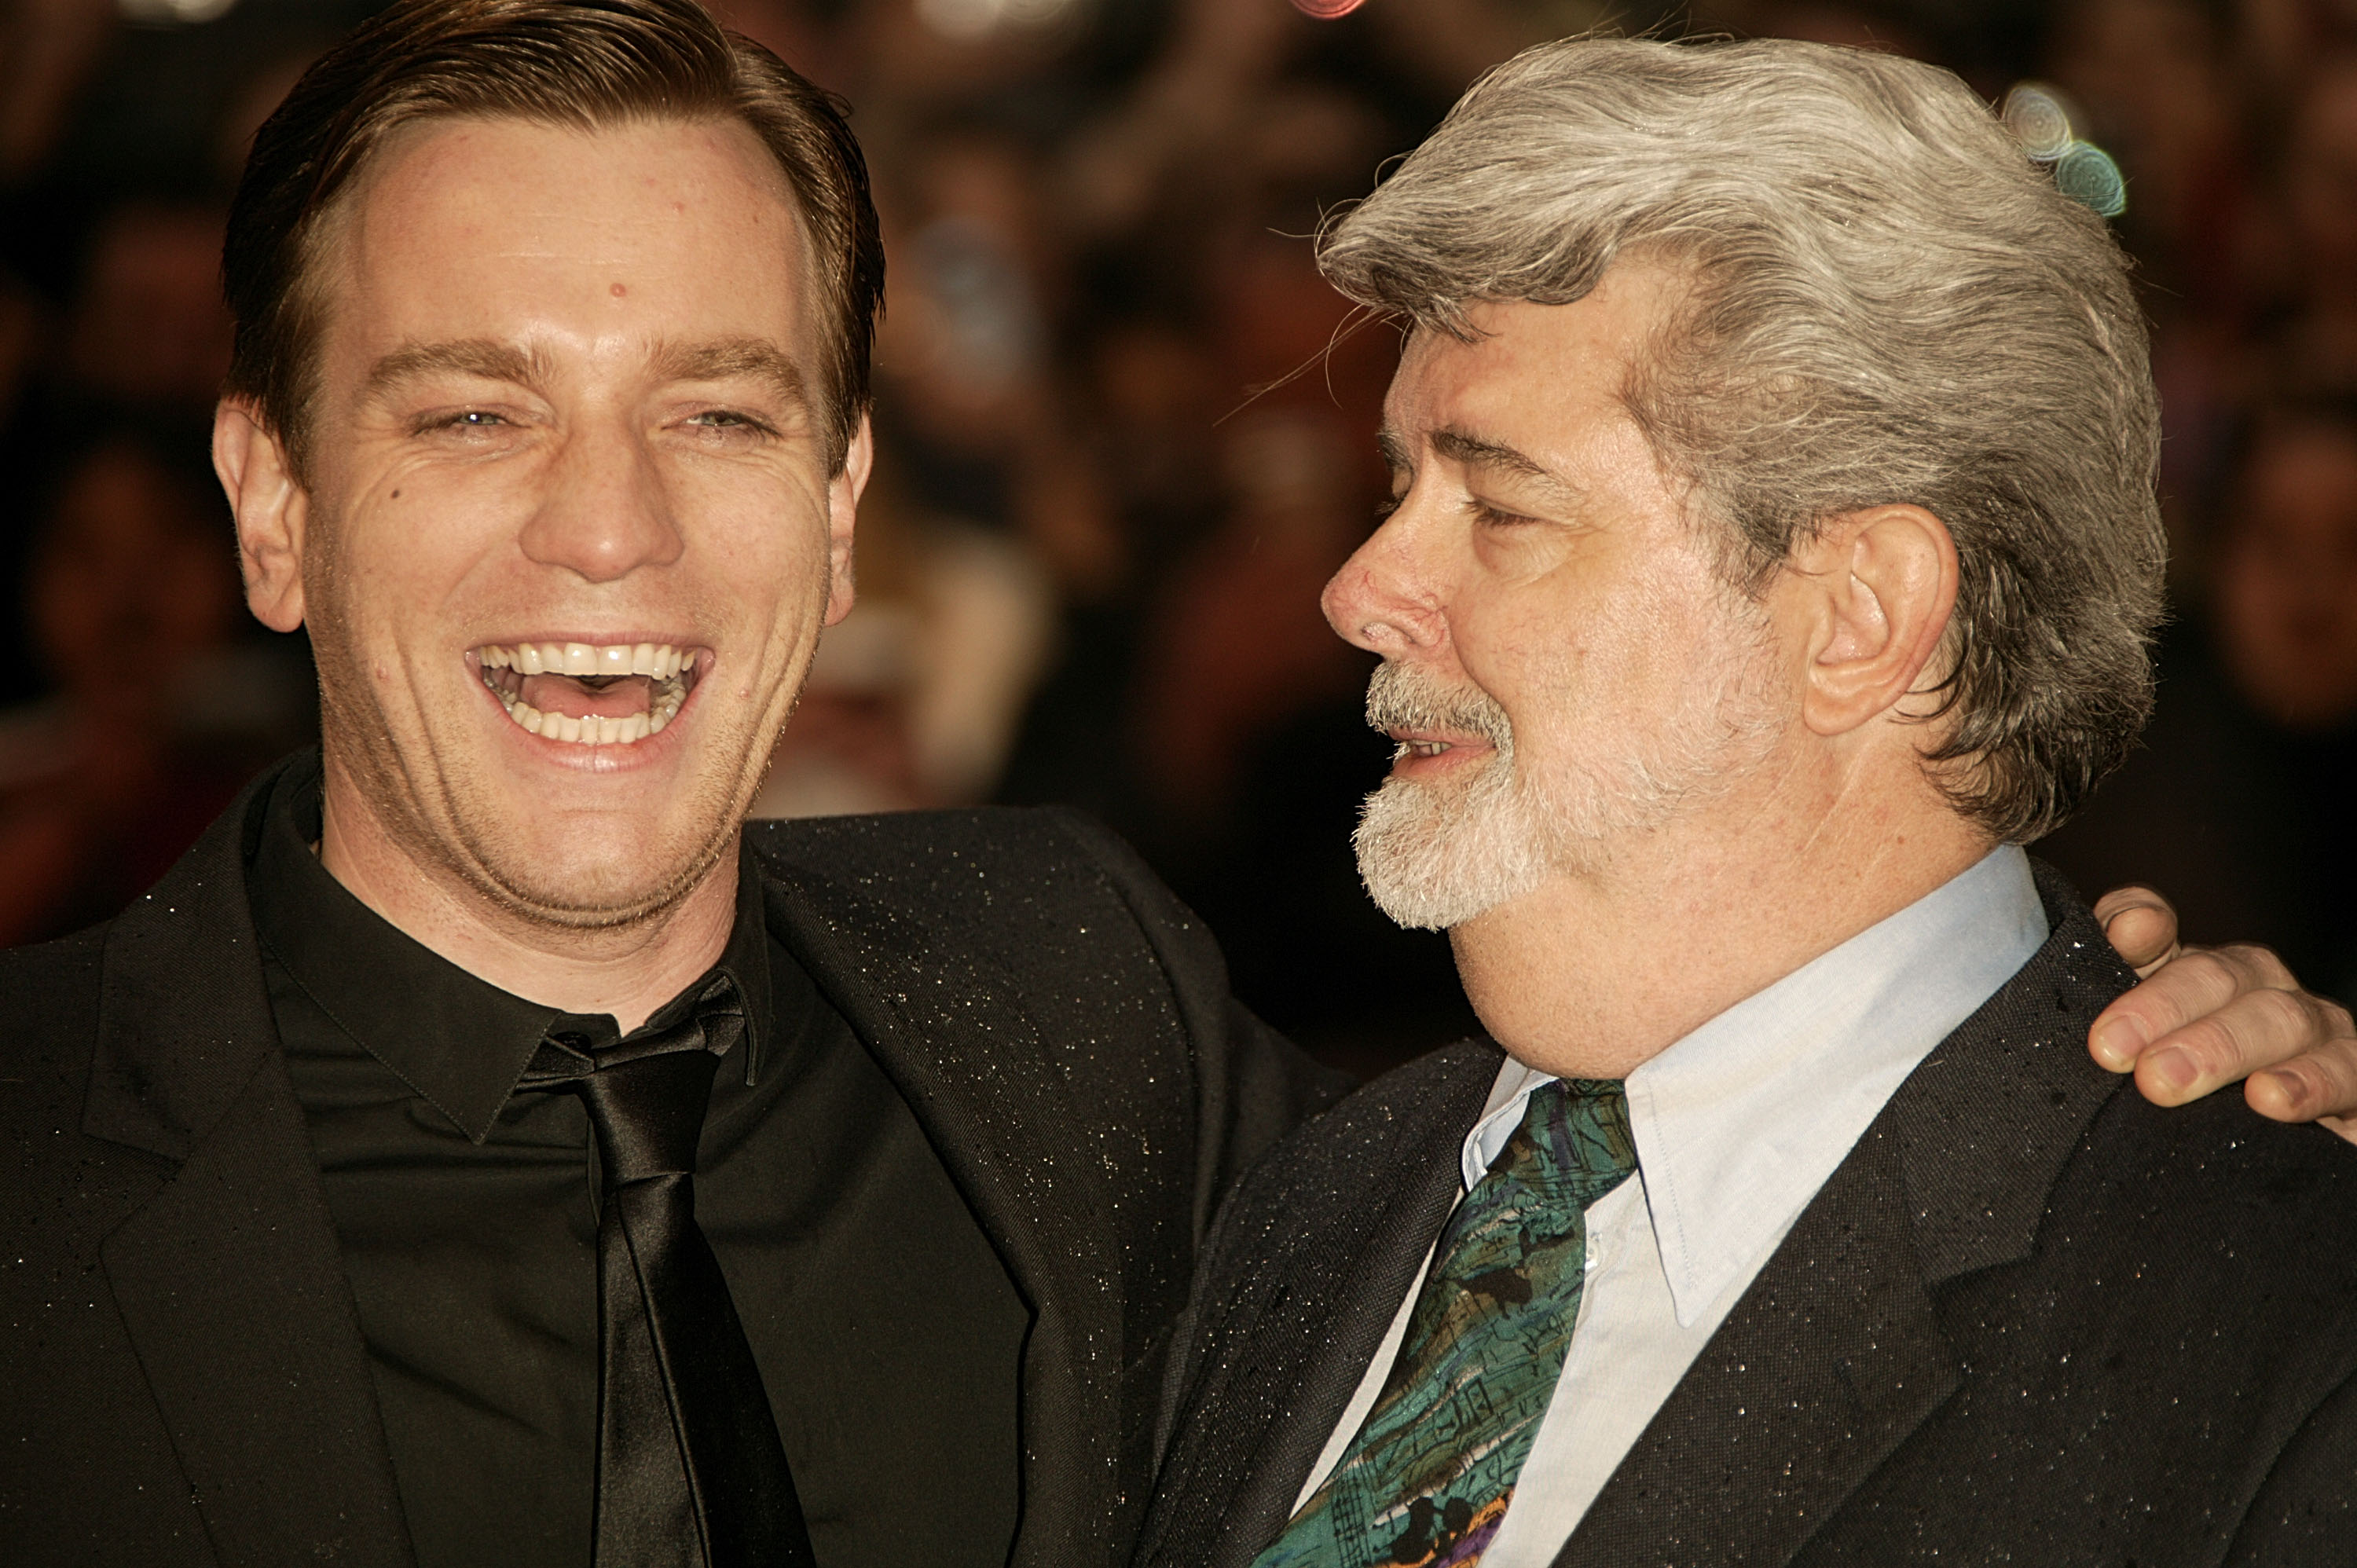 Ewan McGregor, who plays Obi-Wan Kenobi, and George Lucas attend the movie premiere of Star Wars: Episode III: Revenge of the Sith